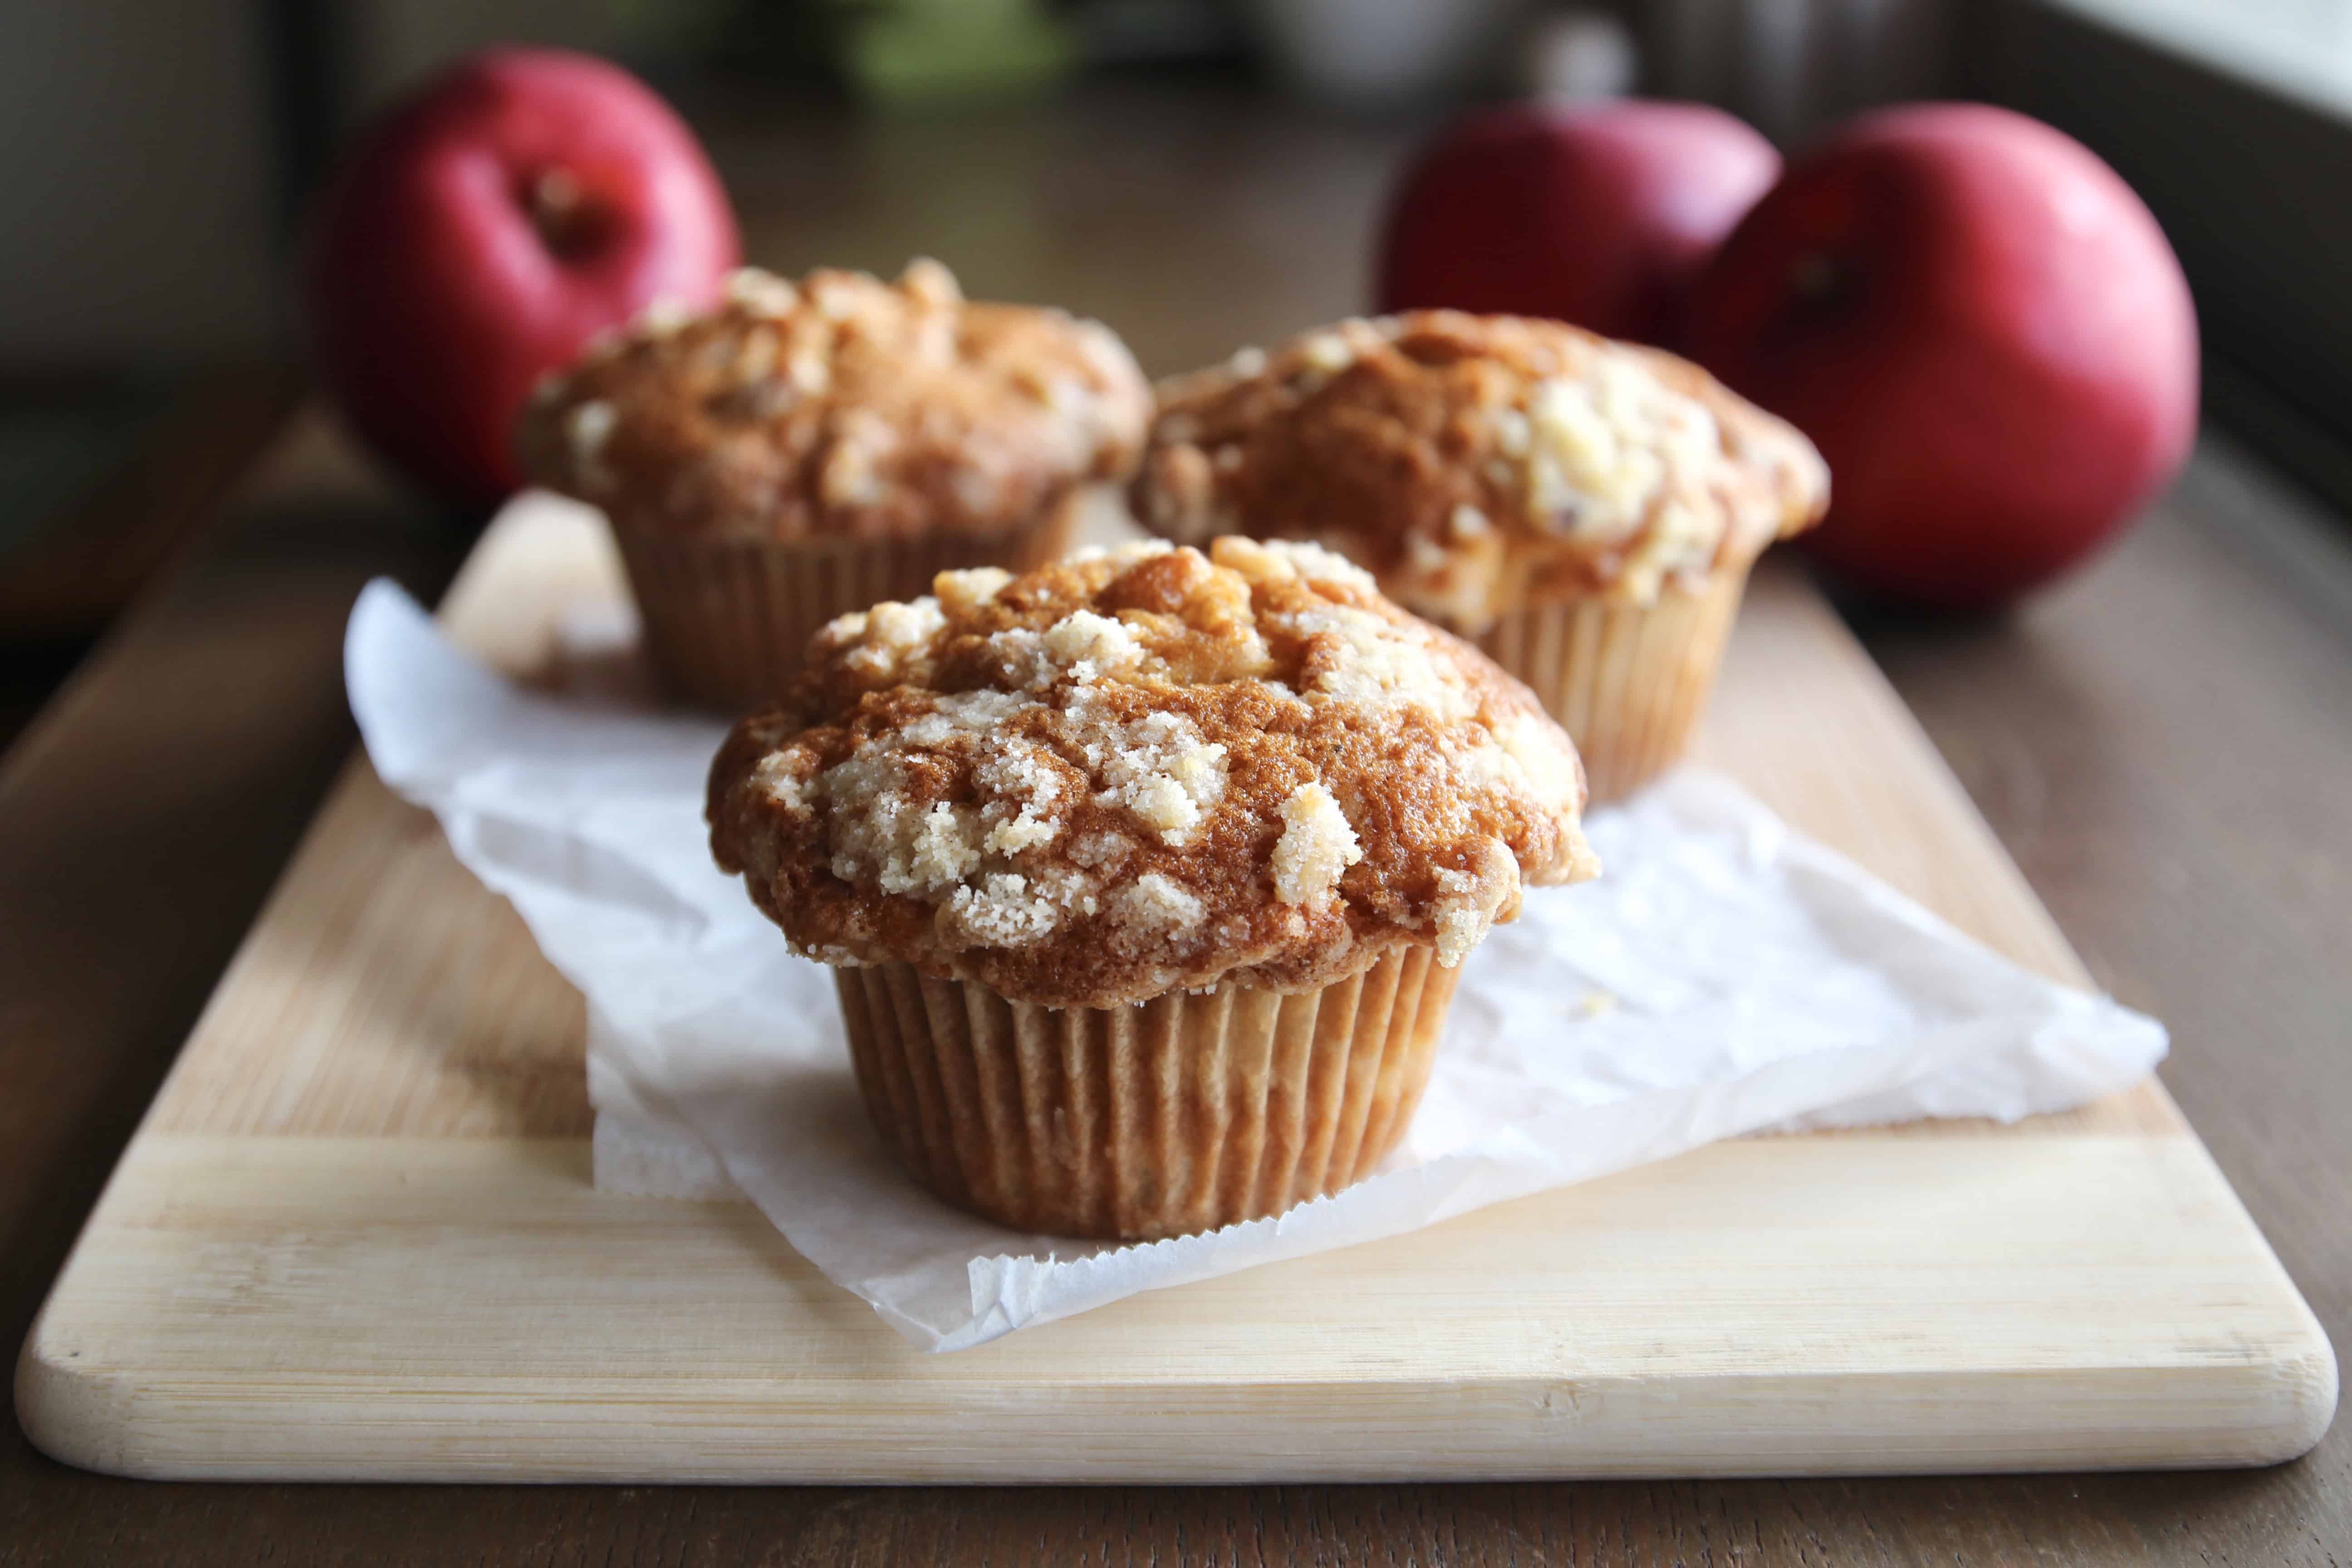 Apple streusel muffins on a wooden board